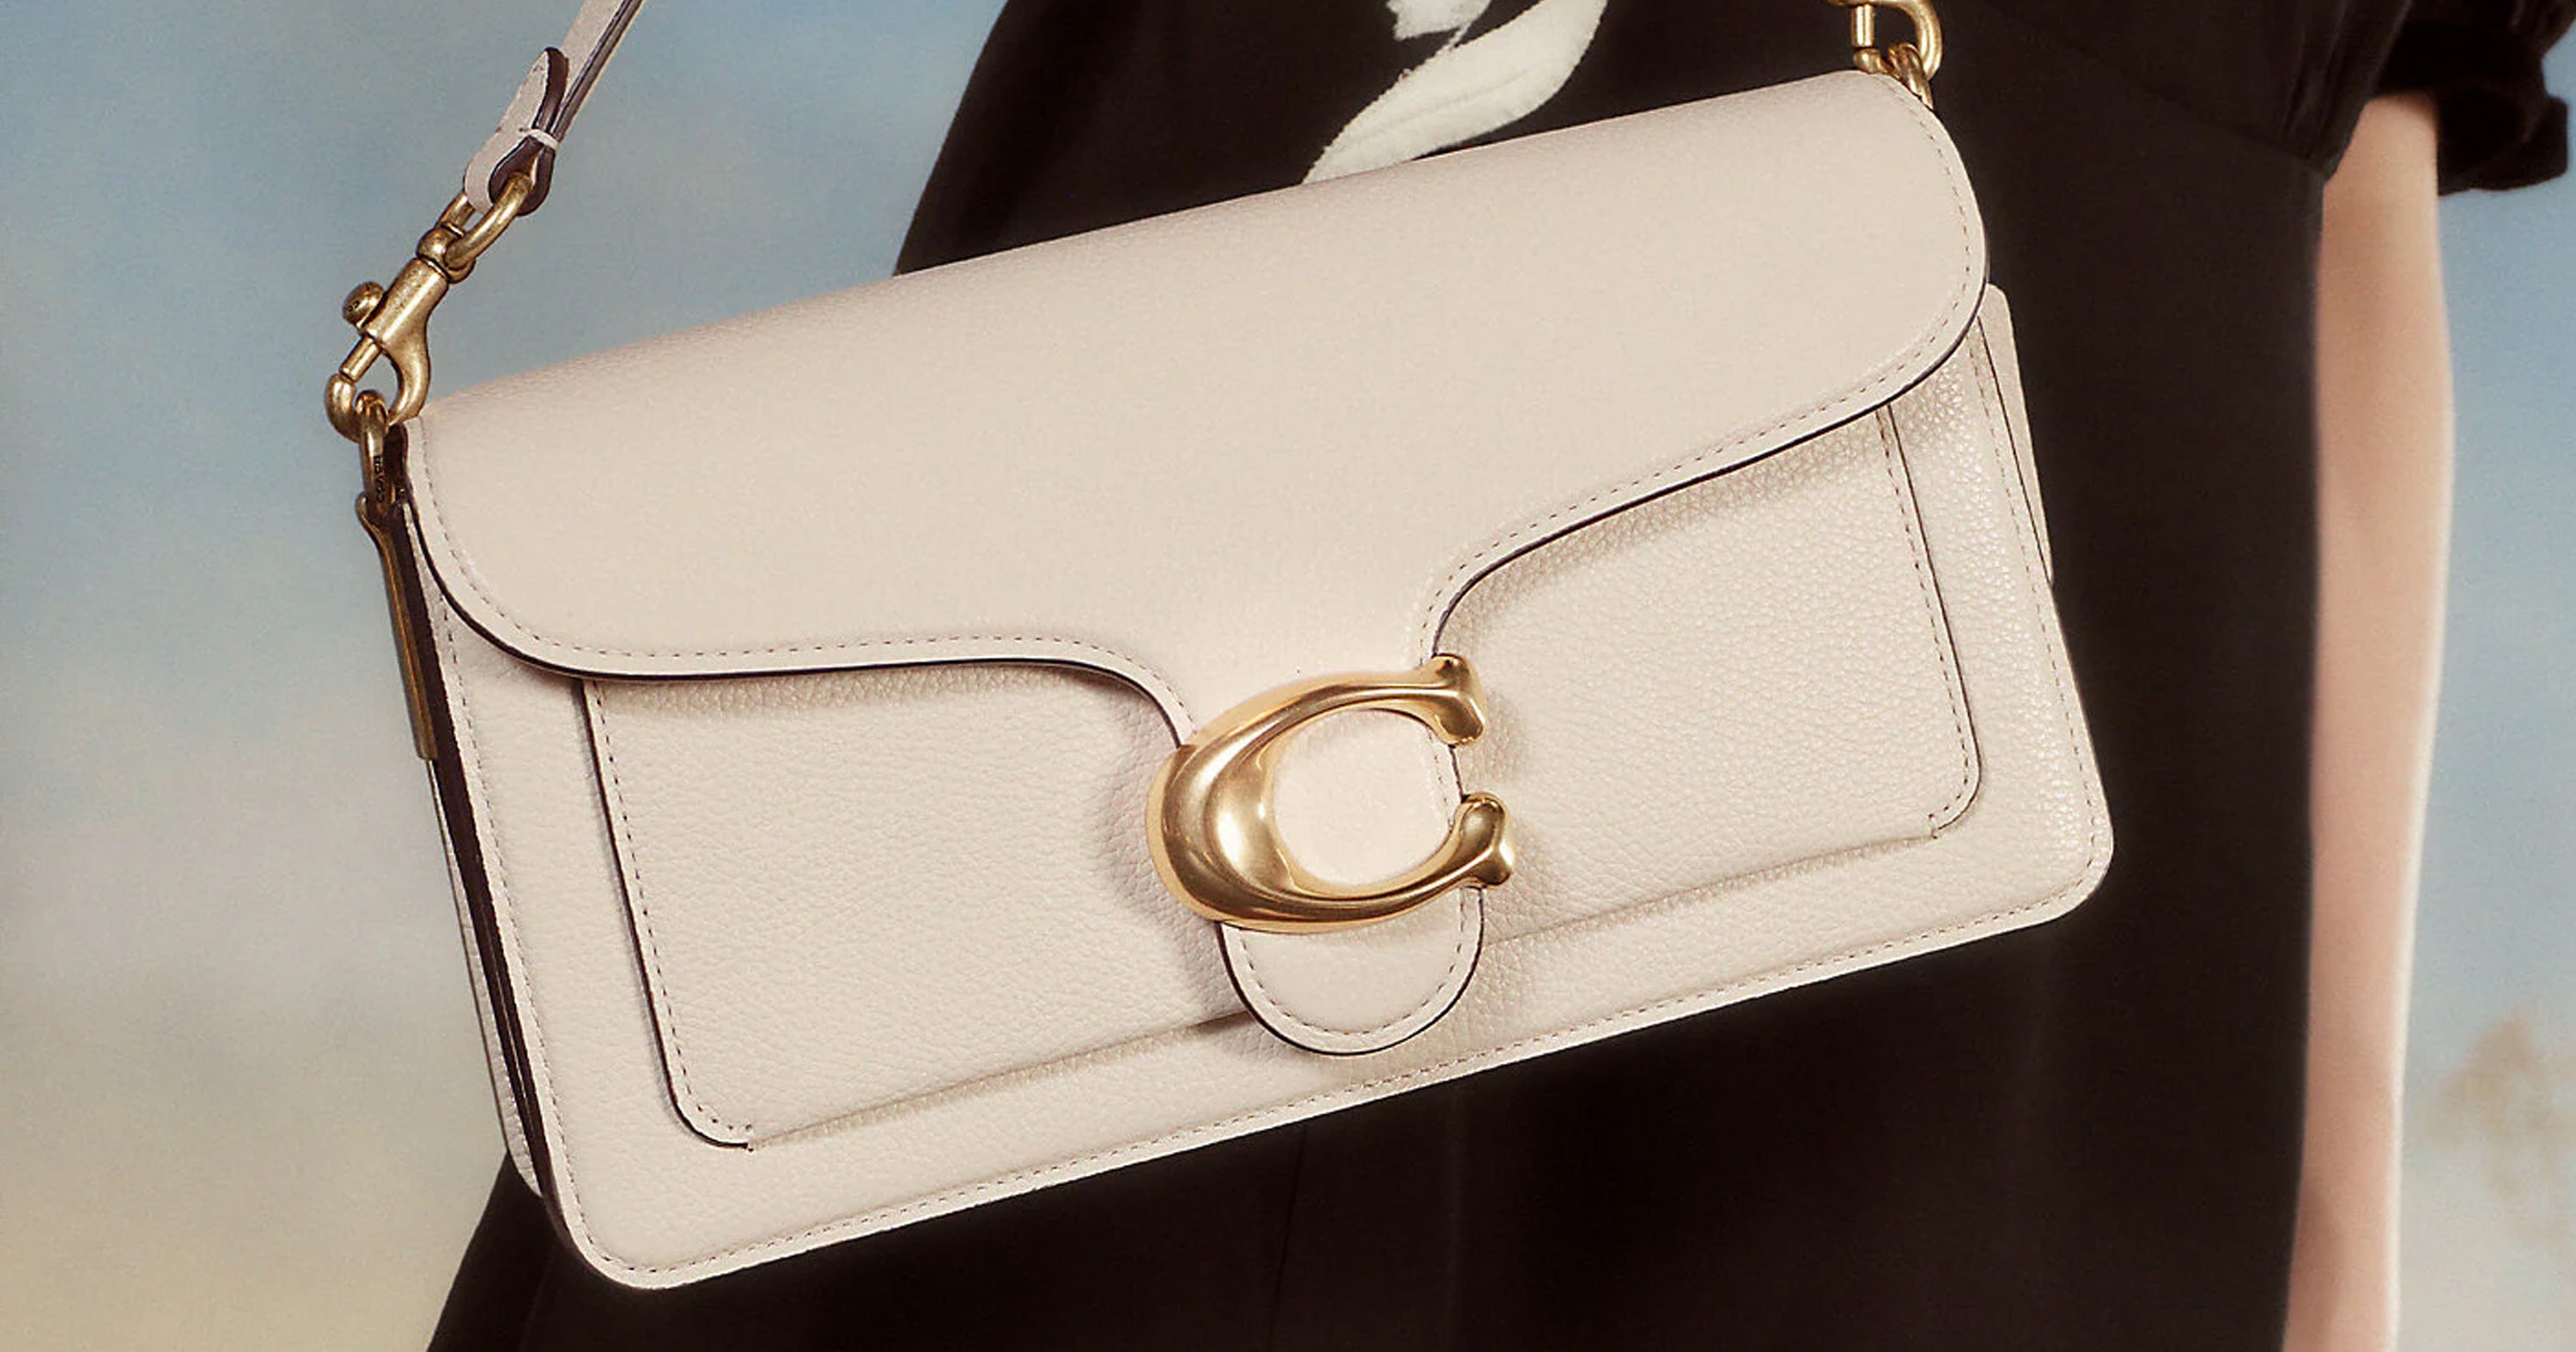 How Coach's Pillow Tabby Bag Launched The Puff Trend To Stardom